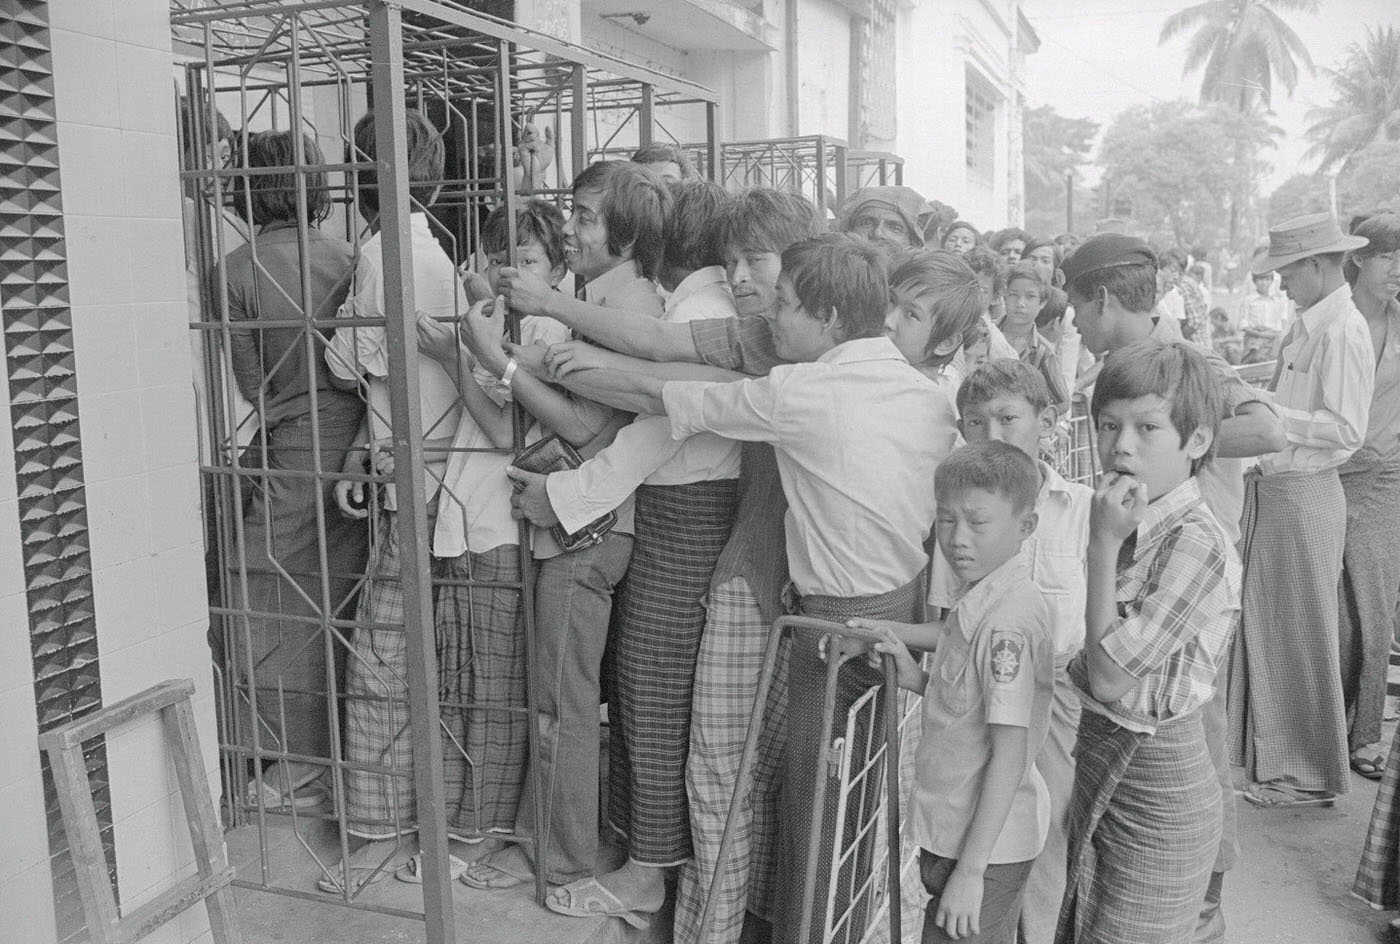 Moviegoers Waiting in Line in Entertainment-Starved Burma for a Foreign Film at a Rangoon Theater, 1988